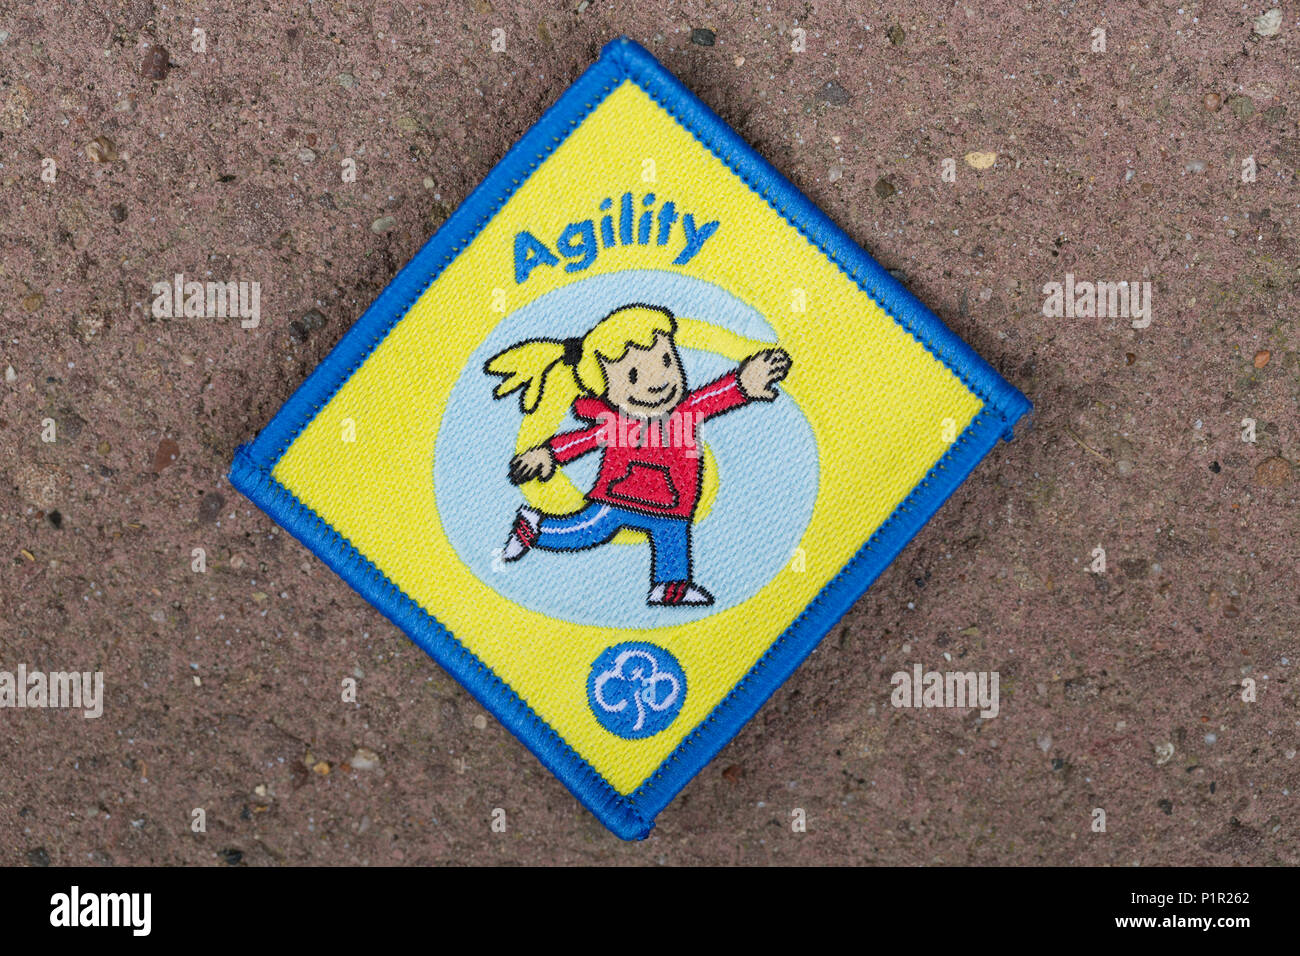 Agility Girl Guide/Brownies Abzeichen Stockfoto